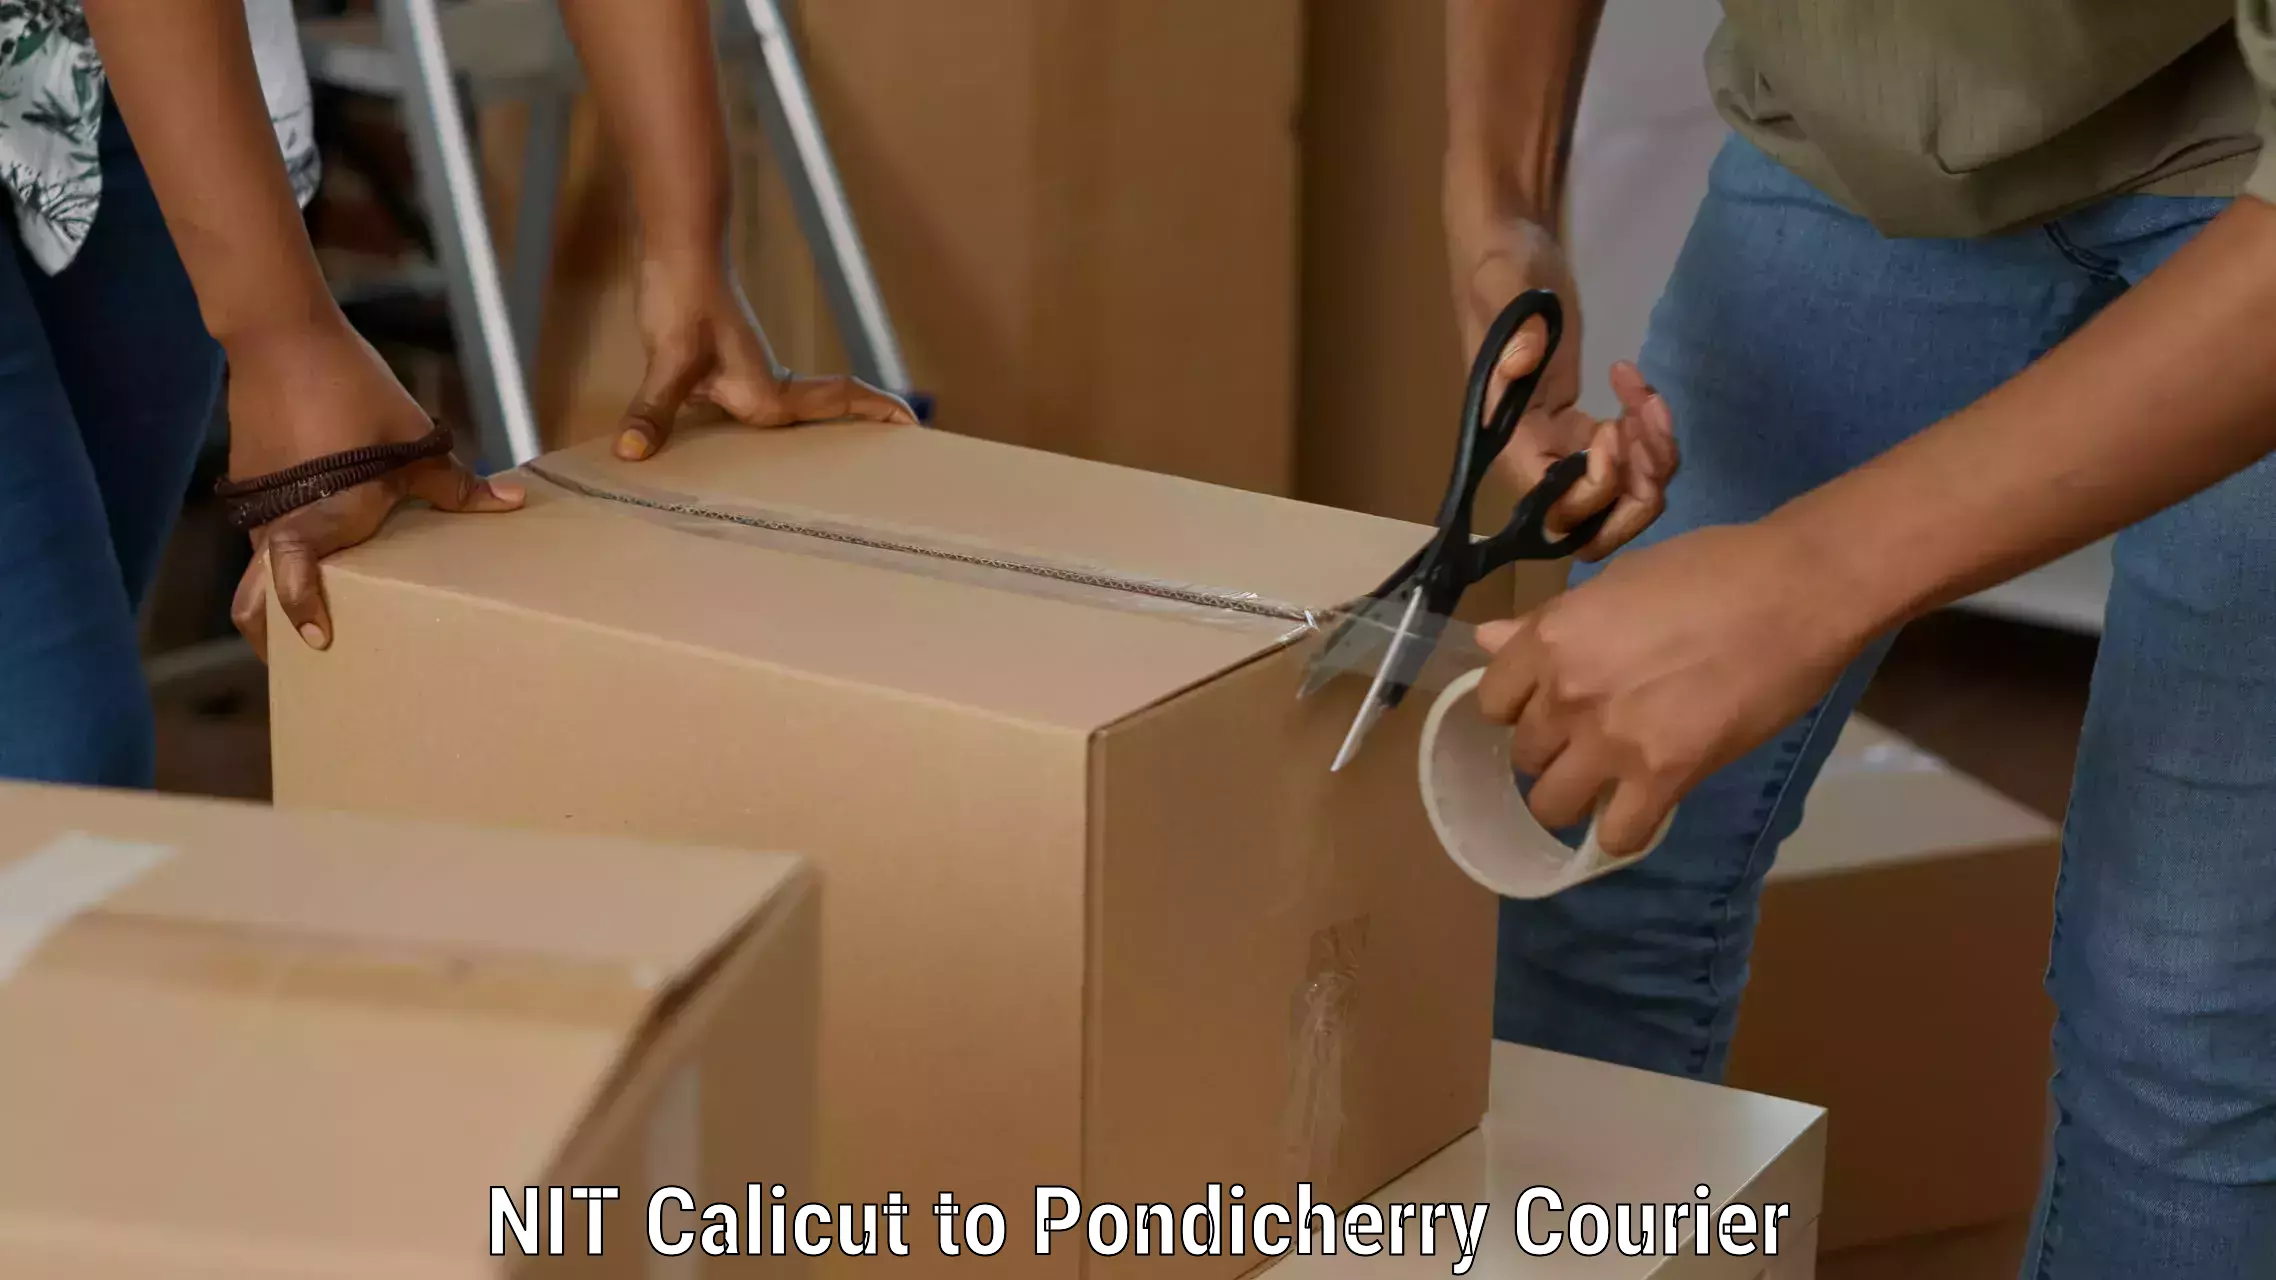 Bulk courier orders in NIT Calicut to Pondicherry University